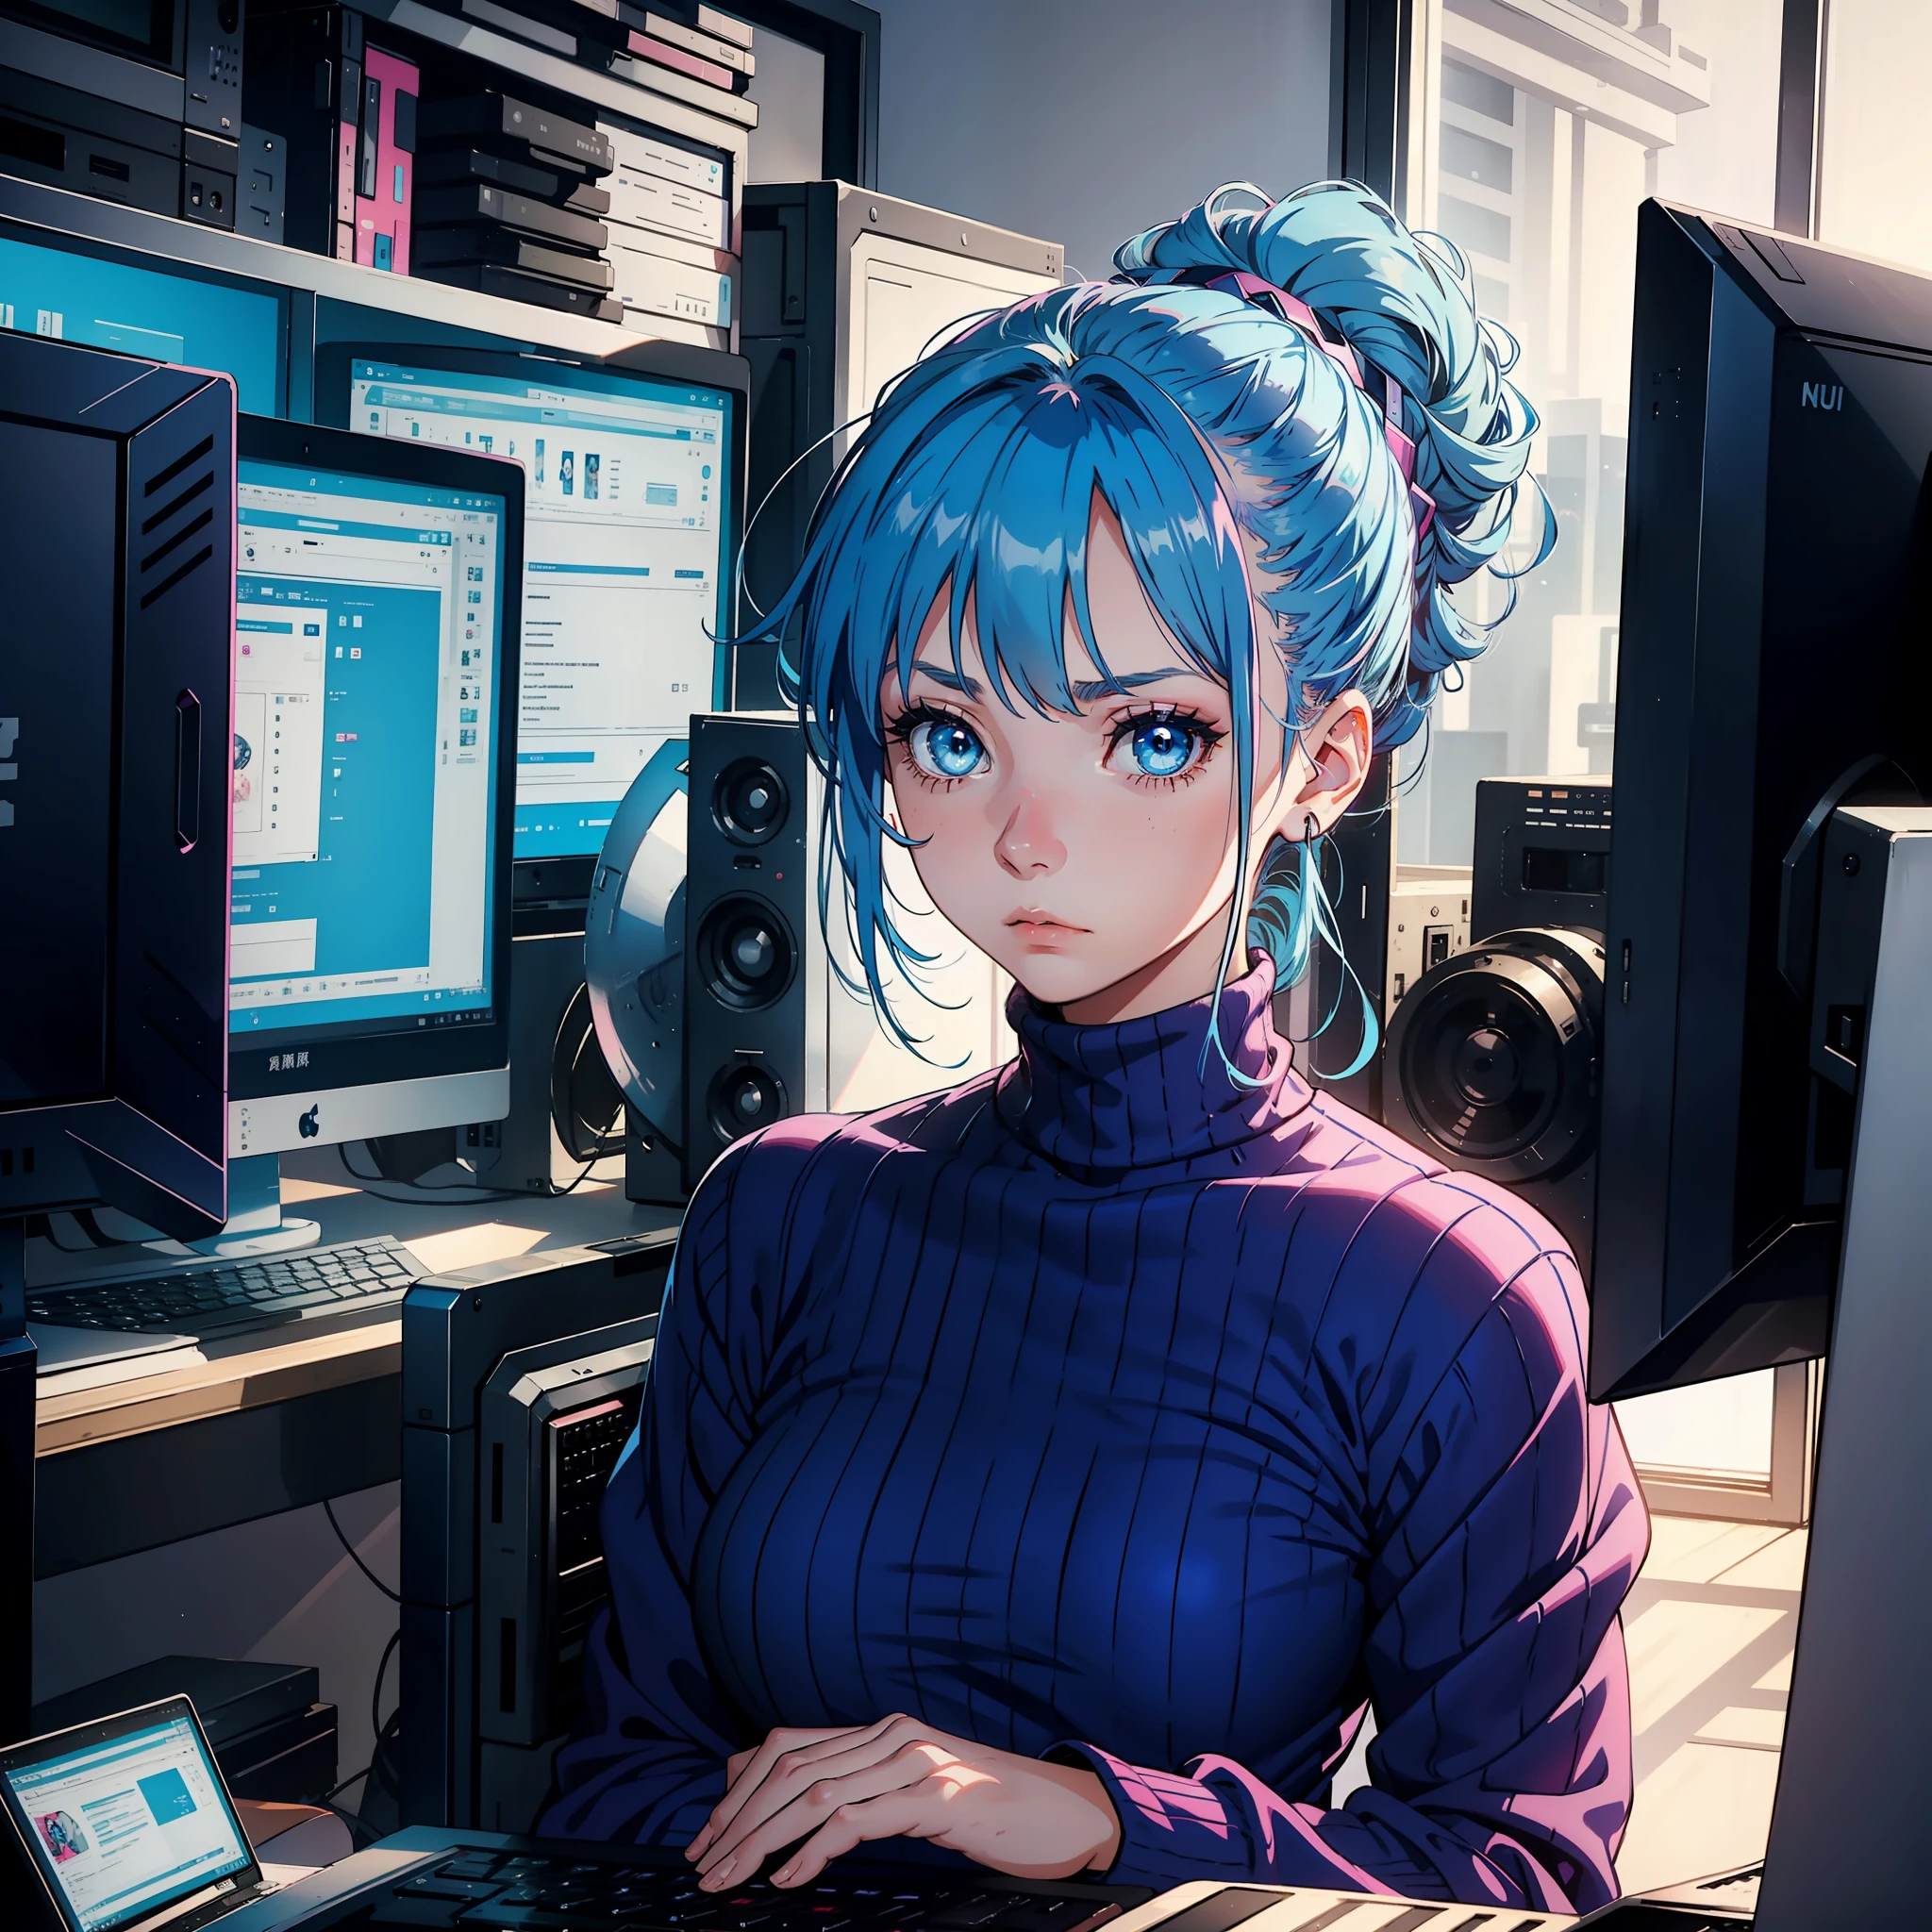 A 20 year old girl with blue hair, blue eyes, updo, turtleneck pink dress, looking at computer screen, sad expression, head down, solo